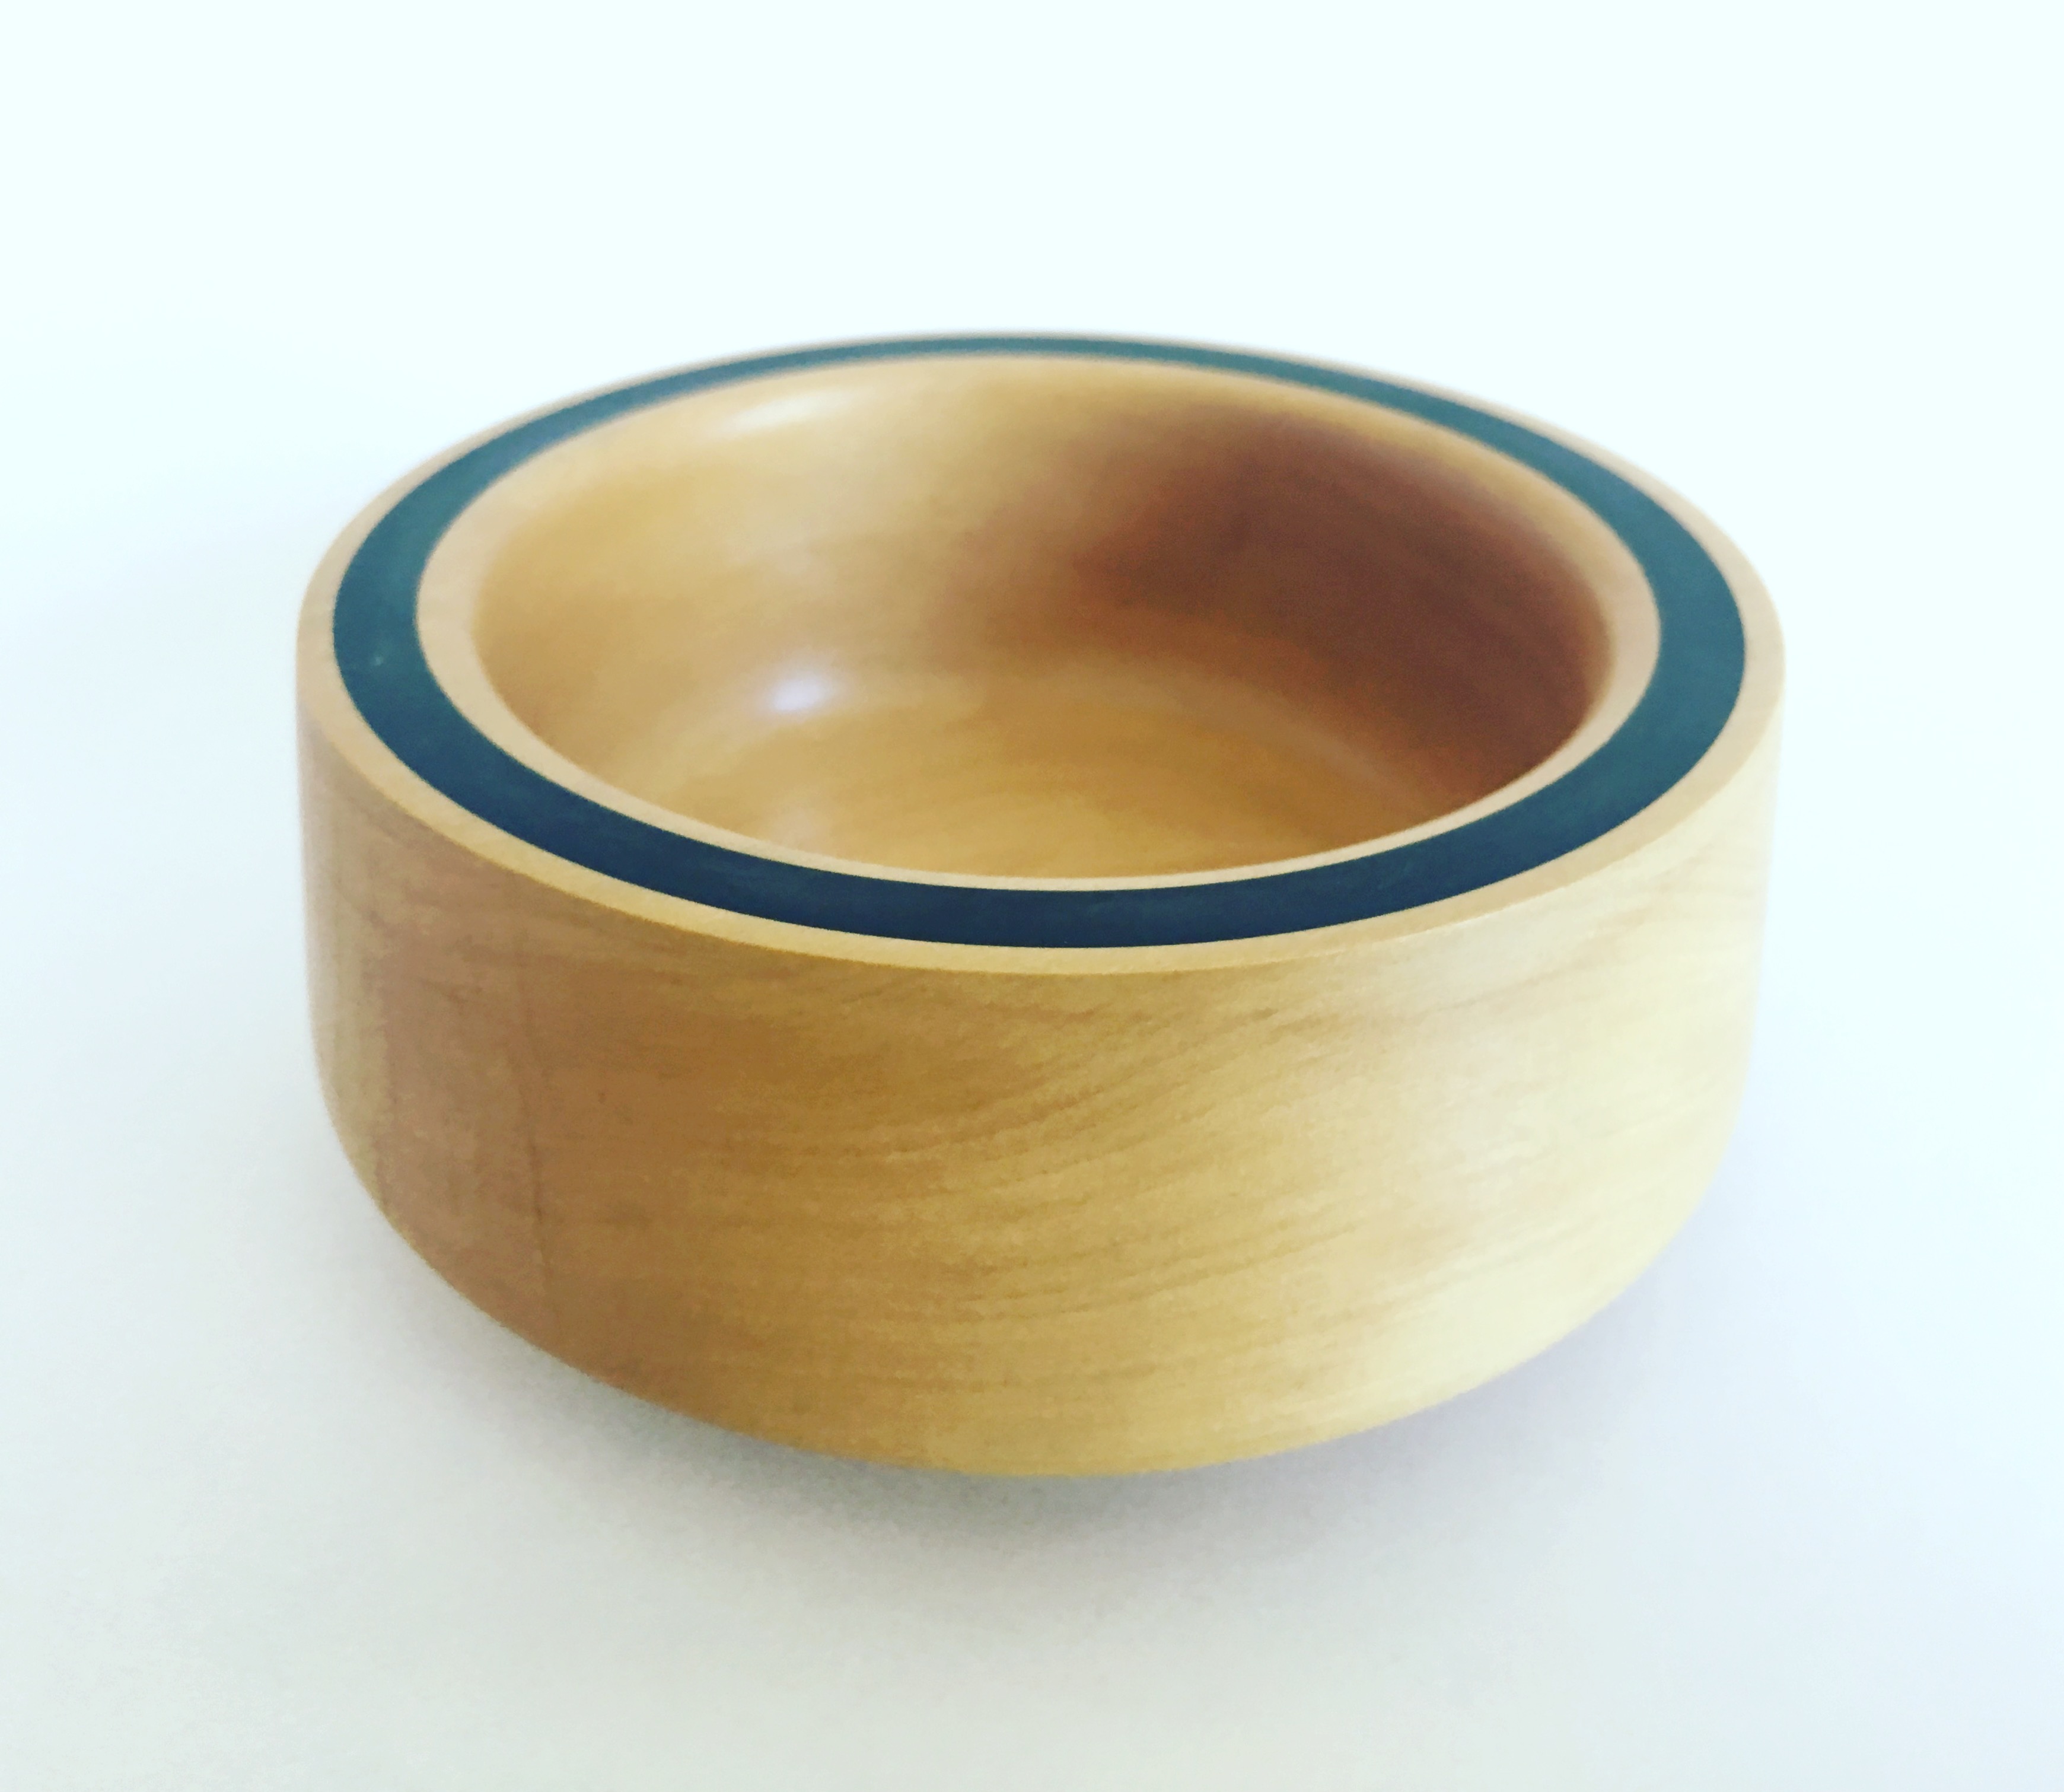 Boxwood and epoxy with beeswax finish